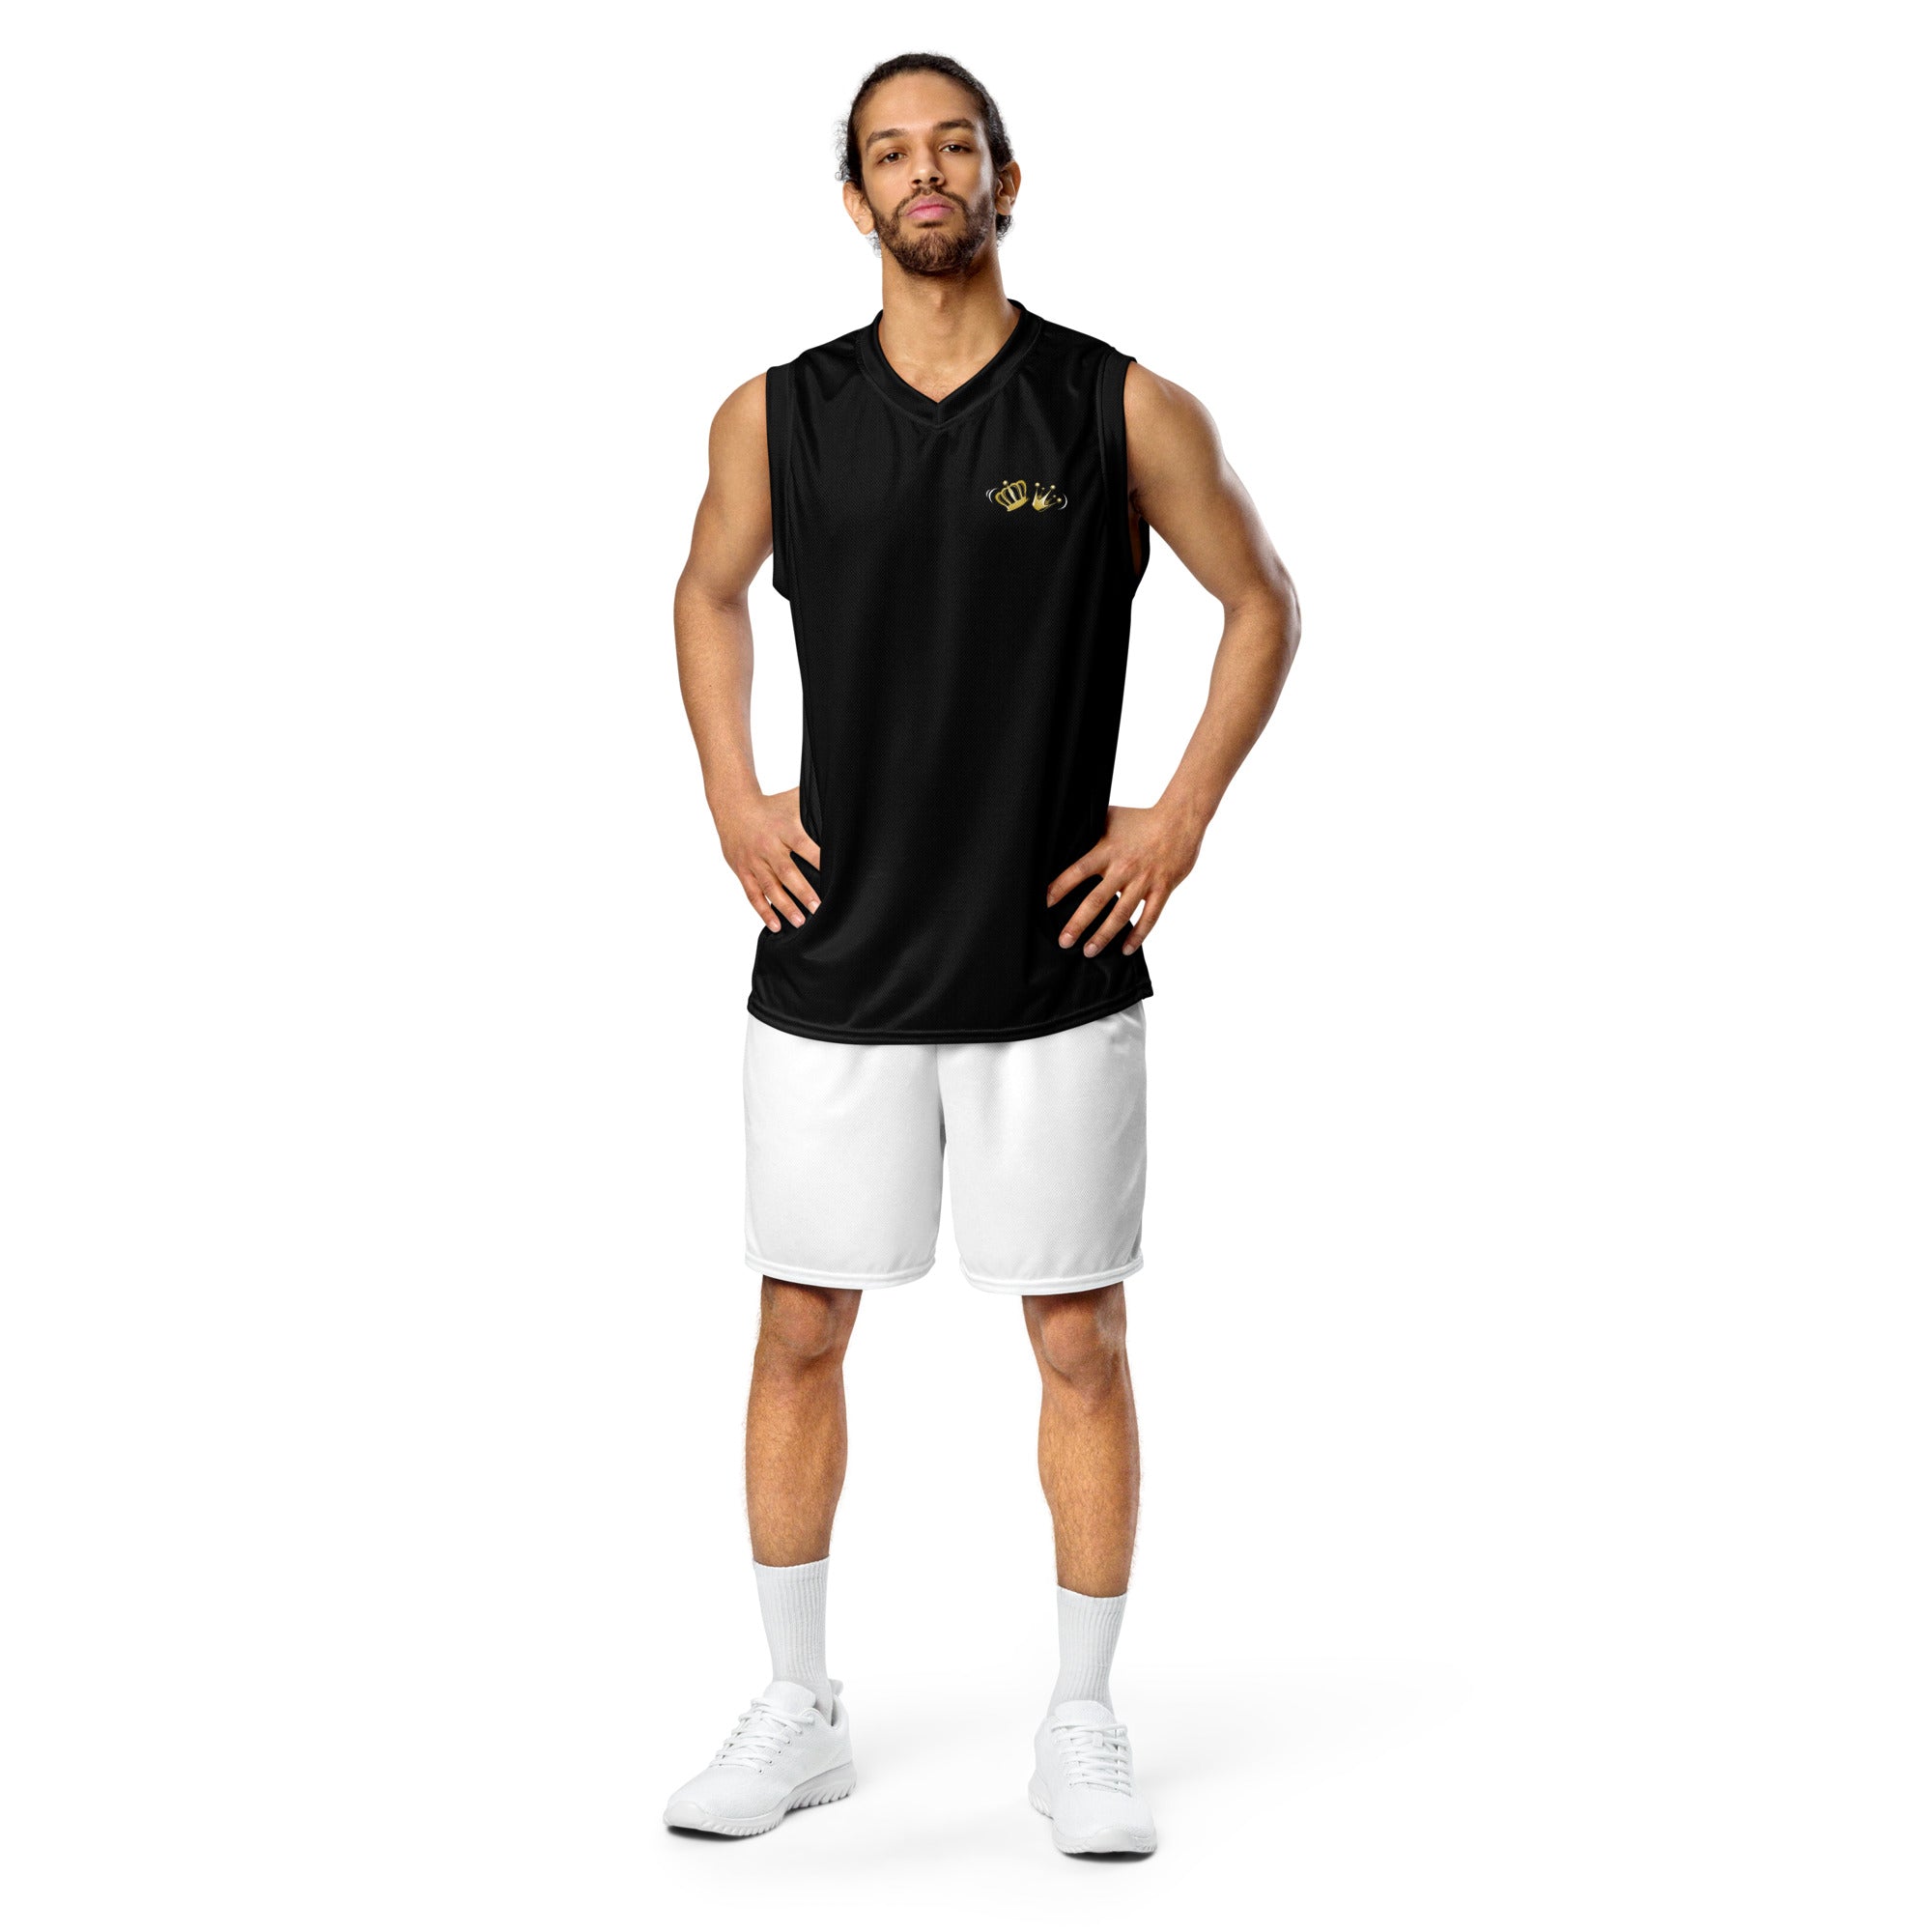 the Elite 2 Recycled unisex basketball jersey